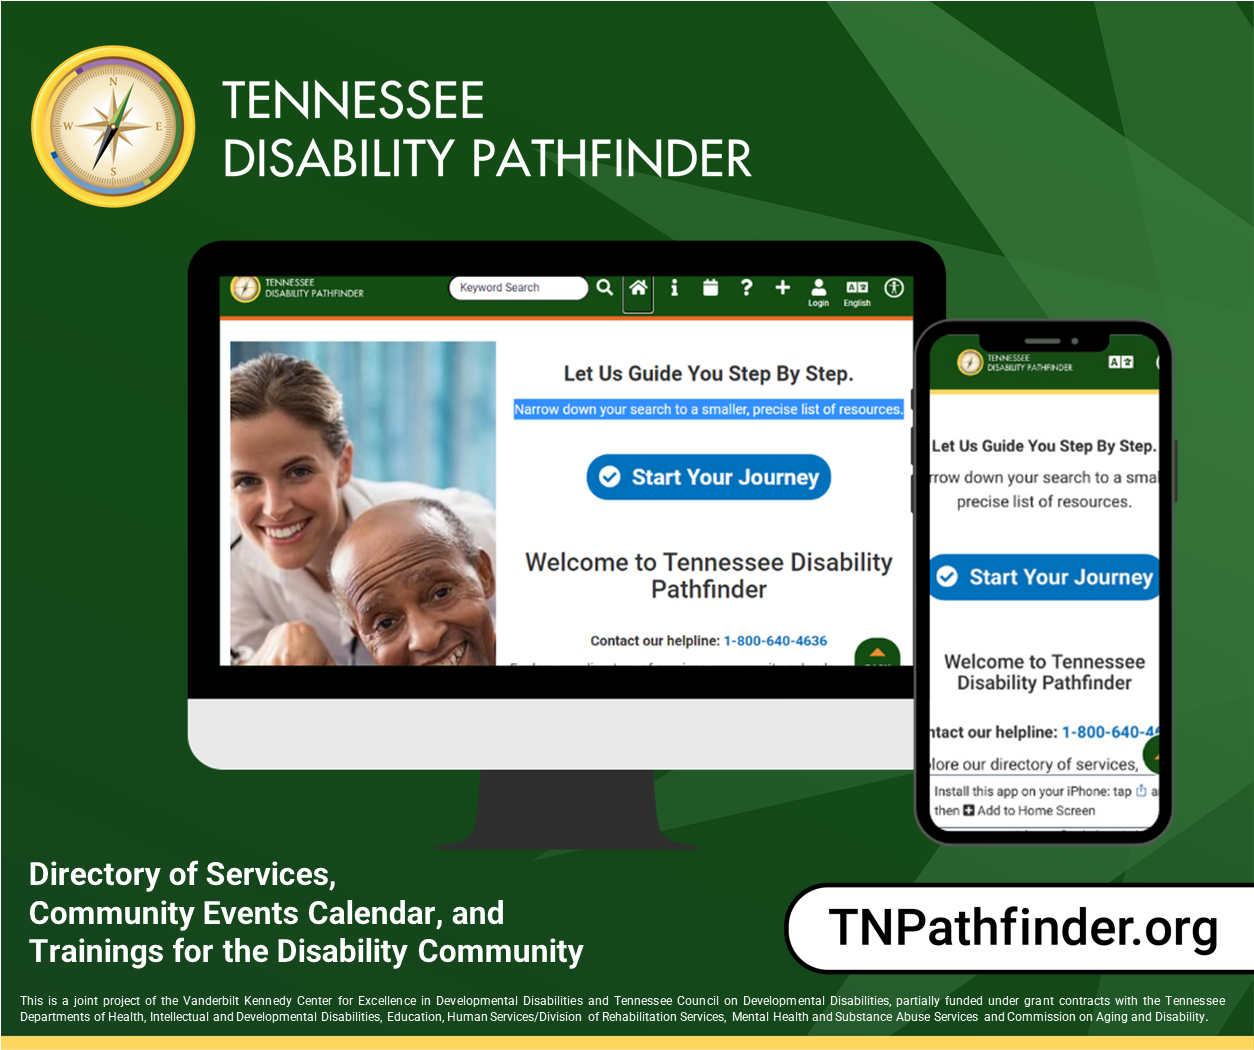 screenshot of TN Disability Pathfinder, showing accessing the site on a mobile device and a laptop browser window; includes Pathfinder logo, the URL, and "directory of services, community events calendar, and trainings for disability community"